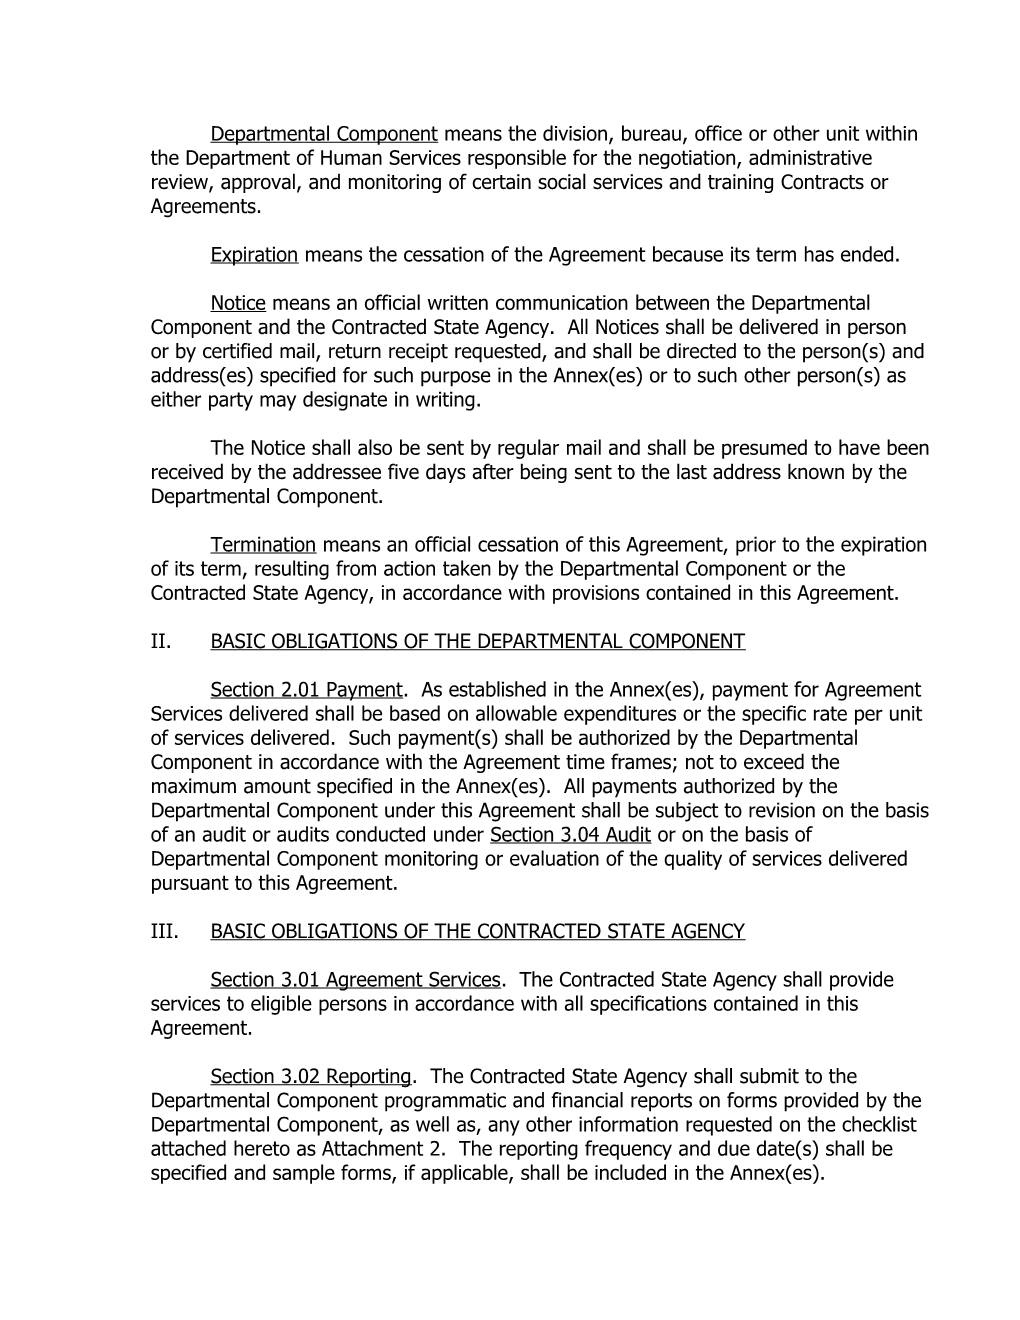 Department of Human Services Agreement s1